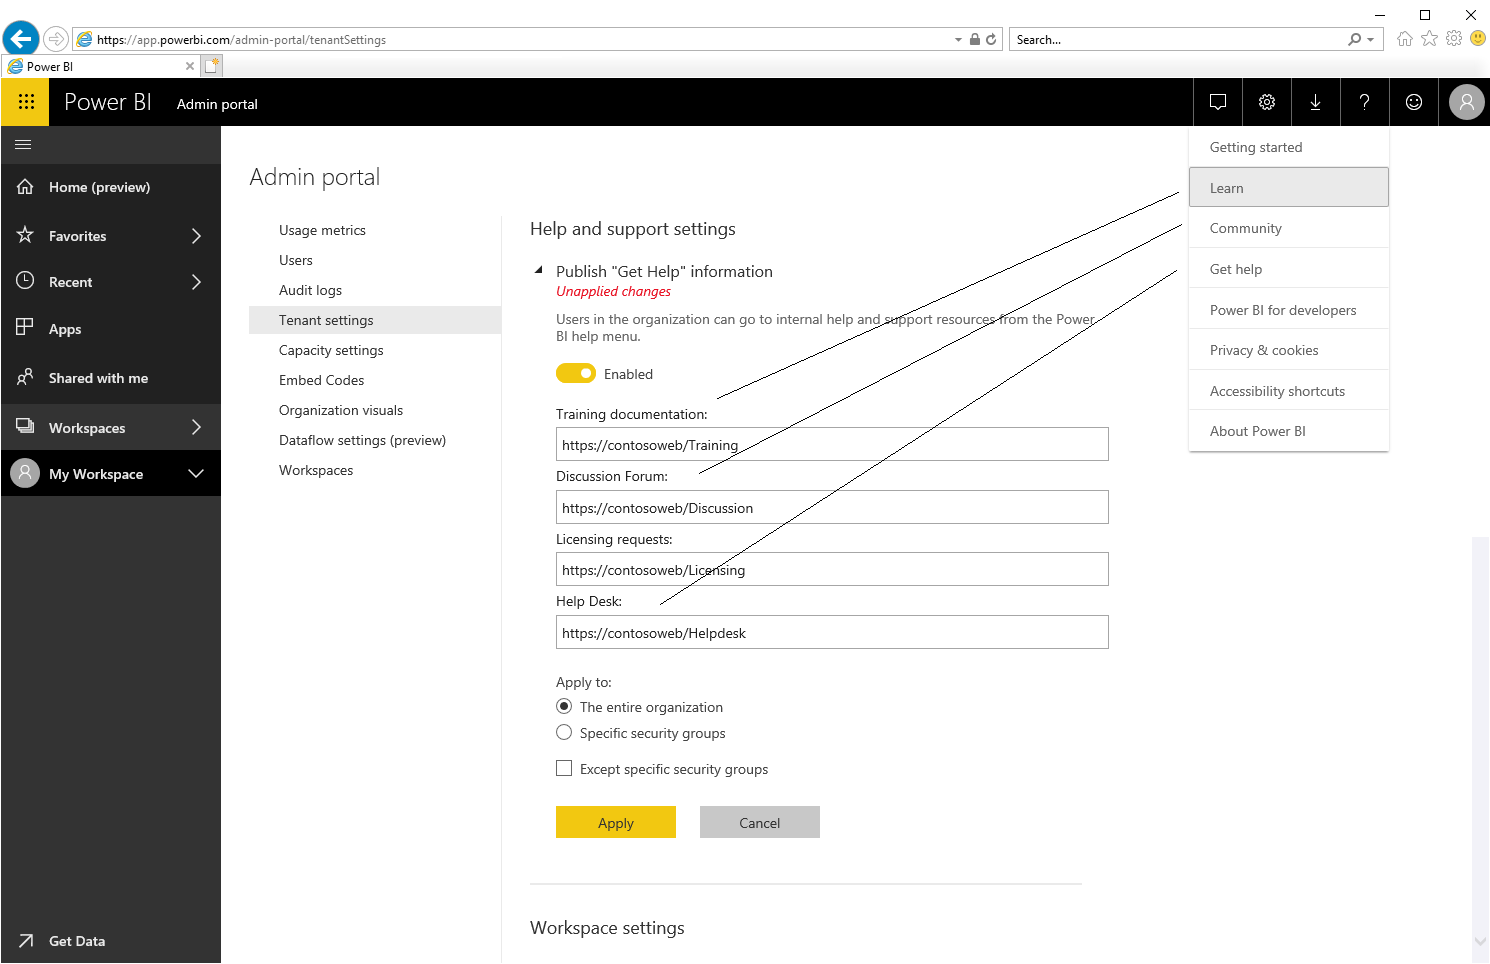 Power BI help and support settings